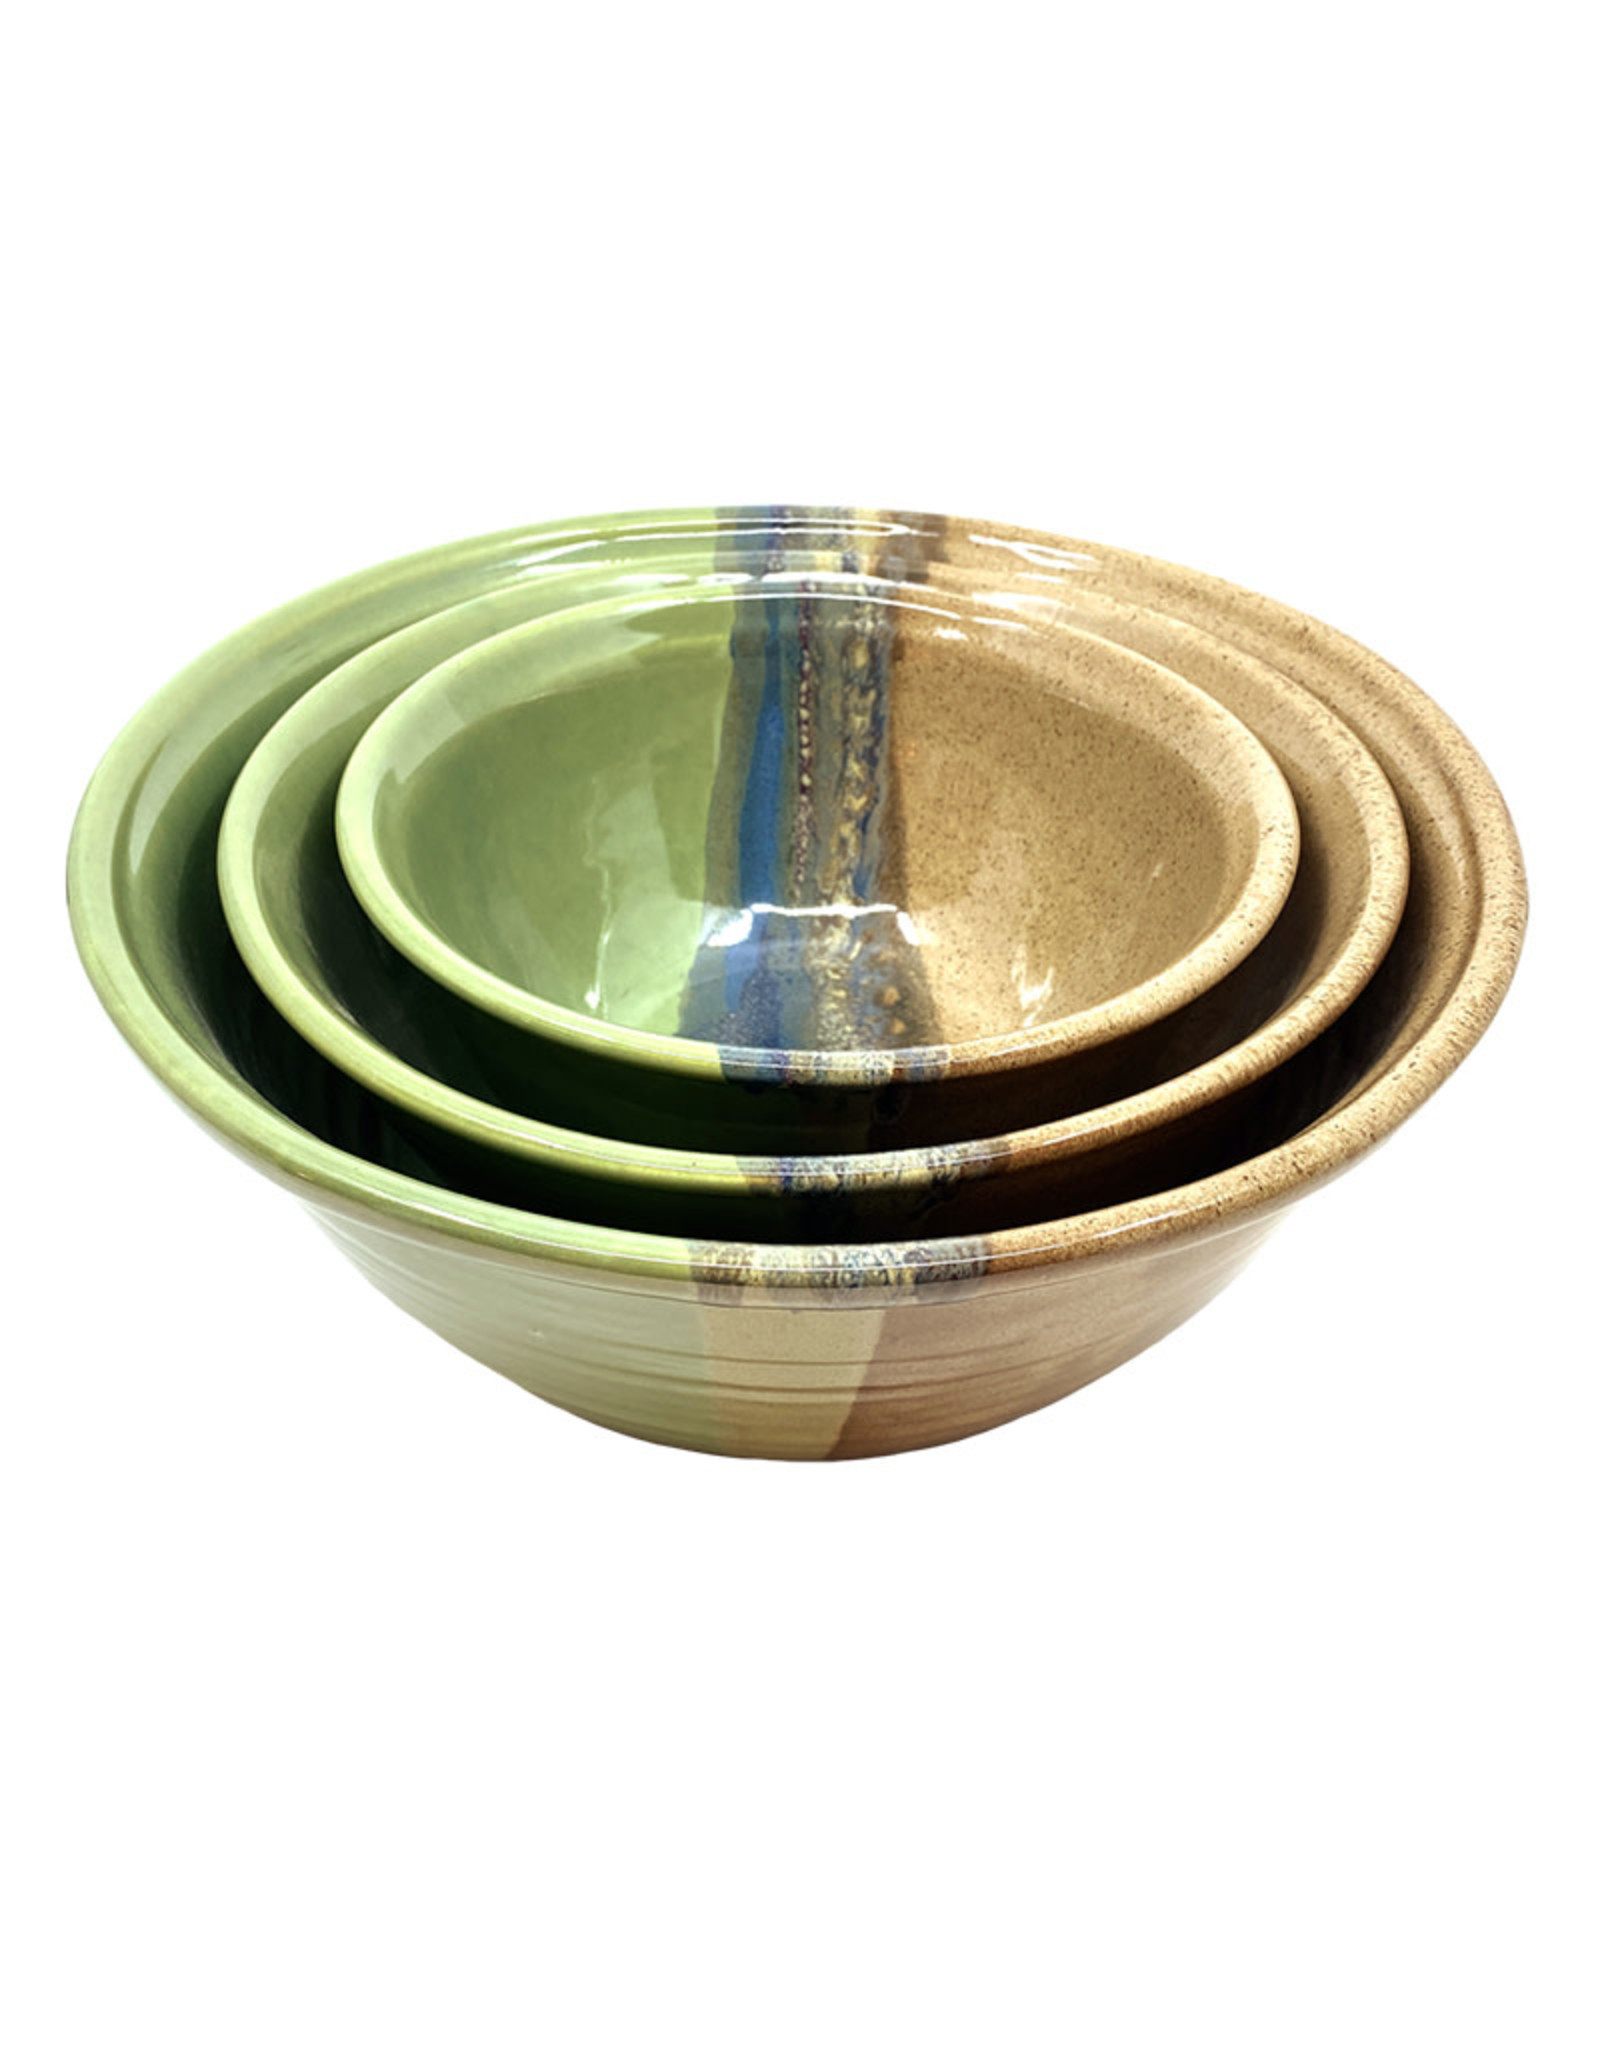 CLAY IN MOTION MOUNTAIN MEADOW NESTING BOWL SET